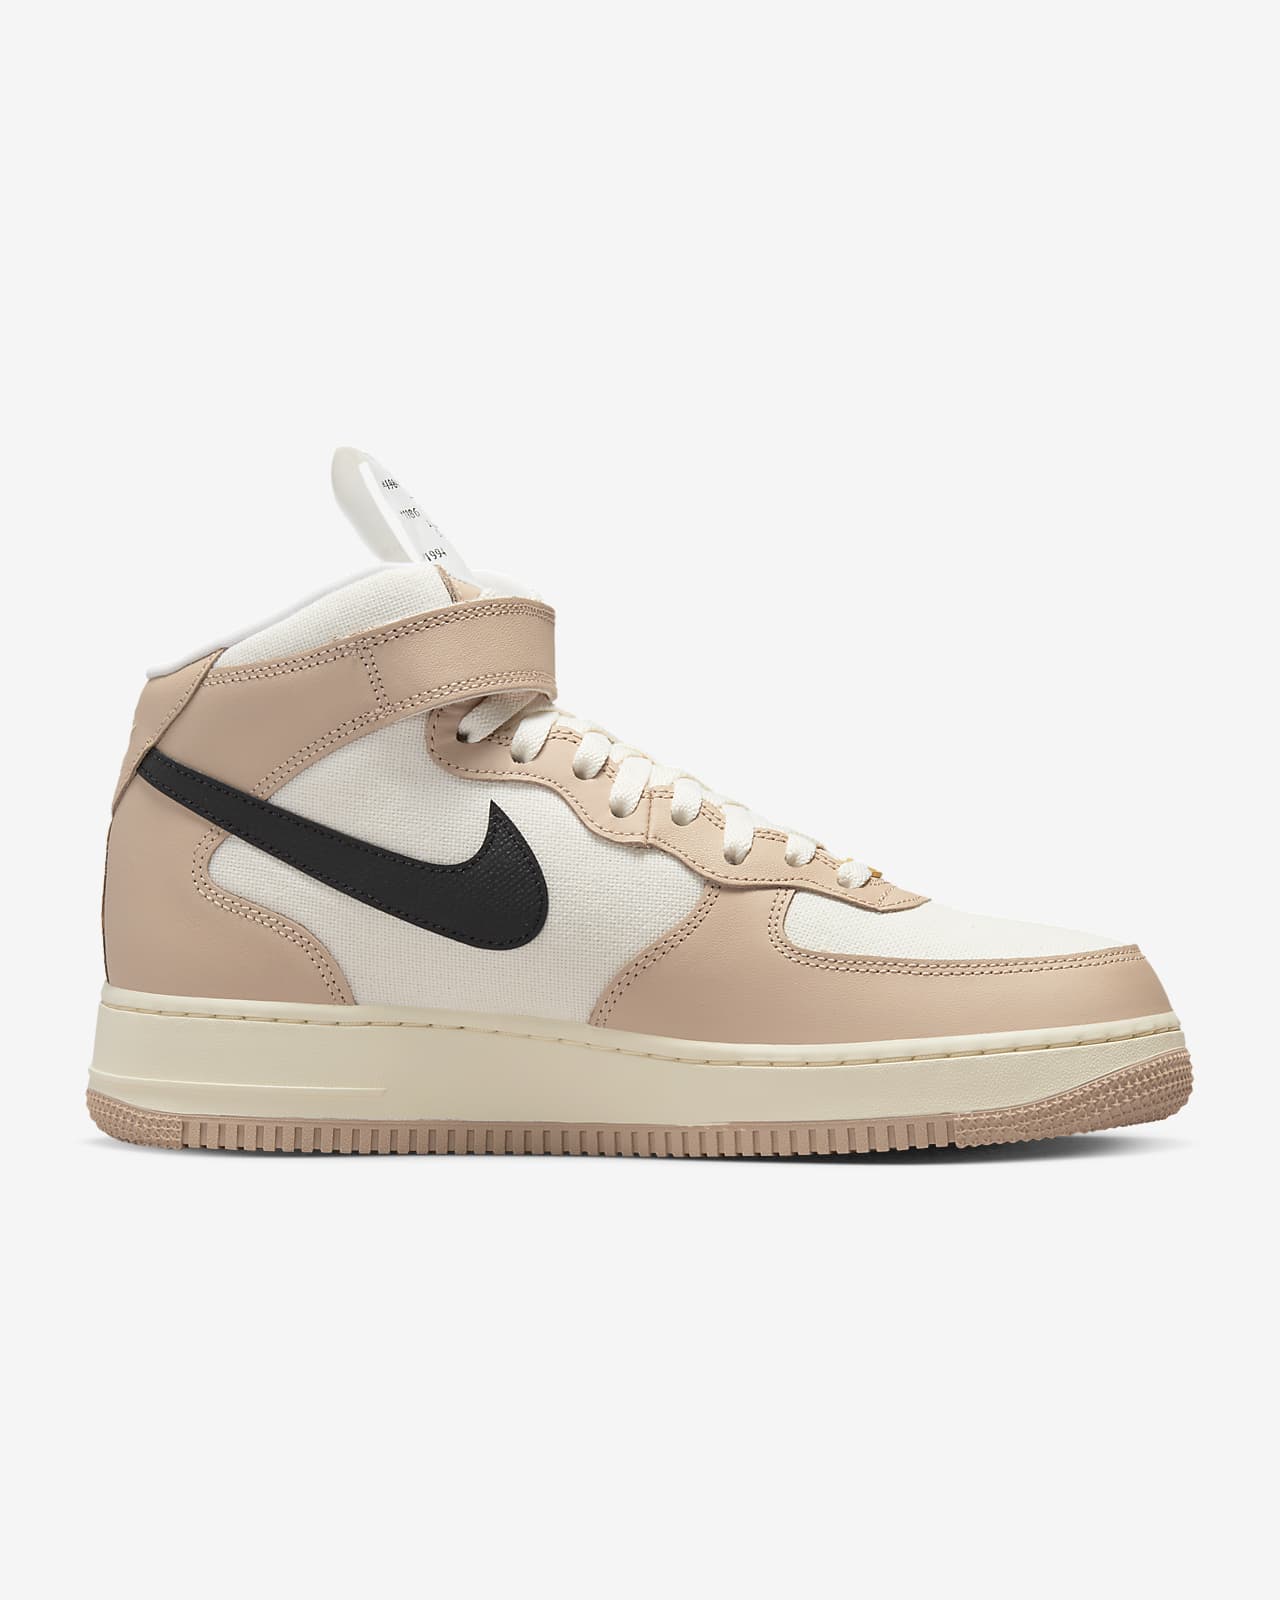 Nike Air Force 1 High '07 LX Men's Shoes